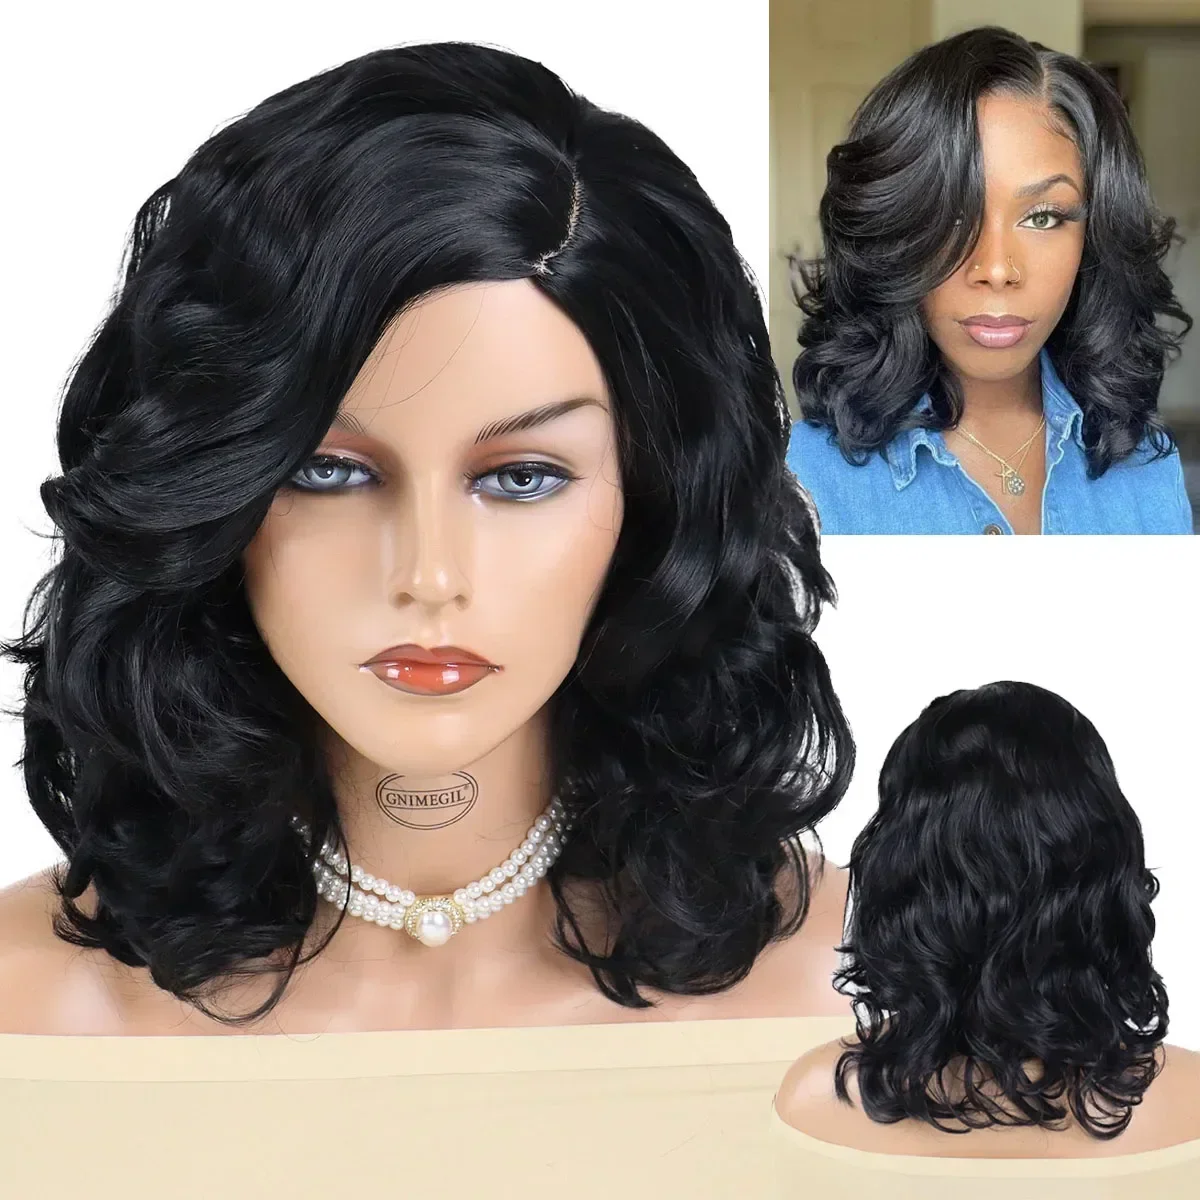 

GNIMEGIL Synthetic Medium Wigs for Women Natural Black Hair Fluffy Curly Wig Side Parting Daily Cosplay Halloween Use Ladies Wig